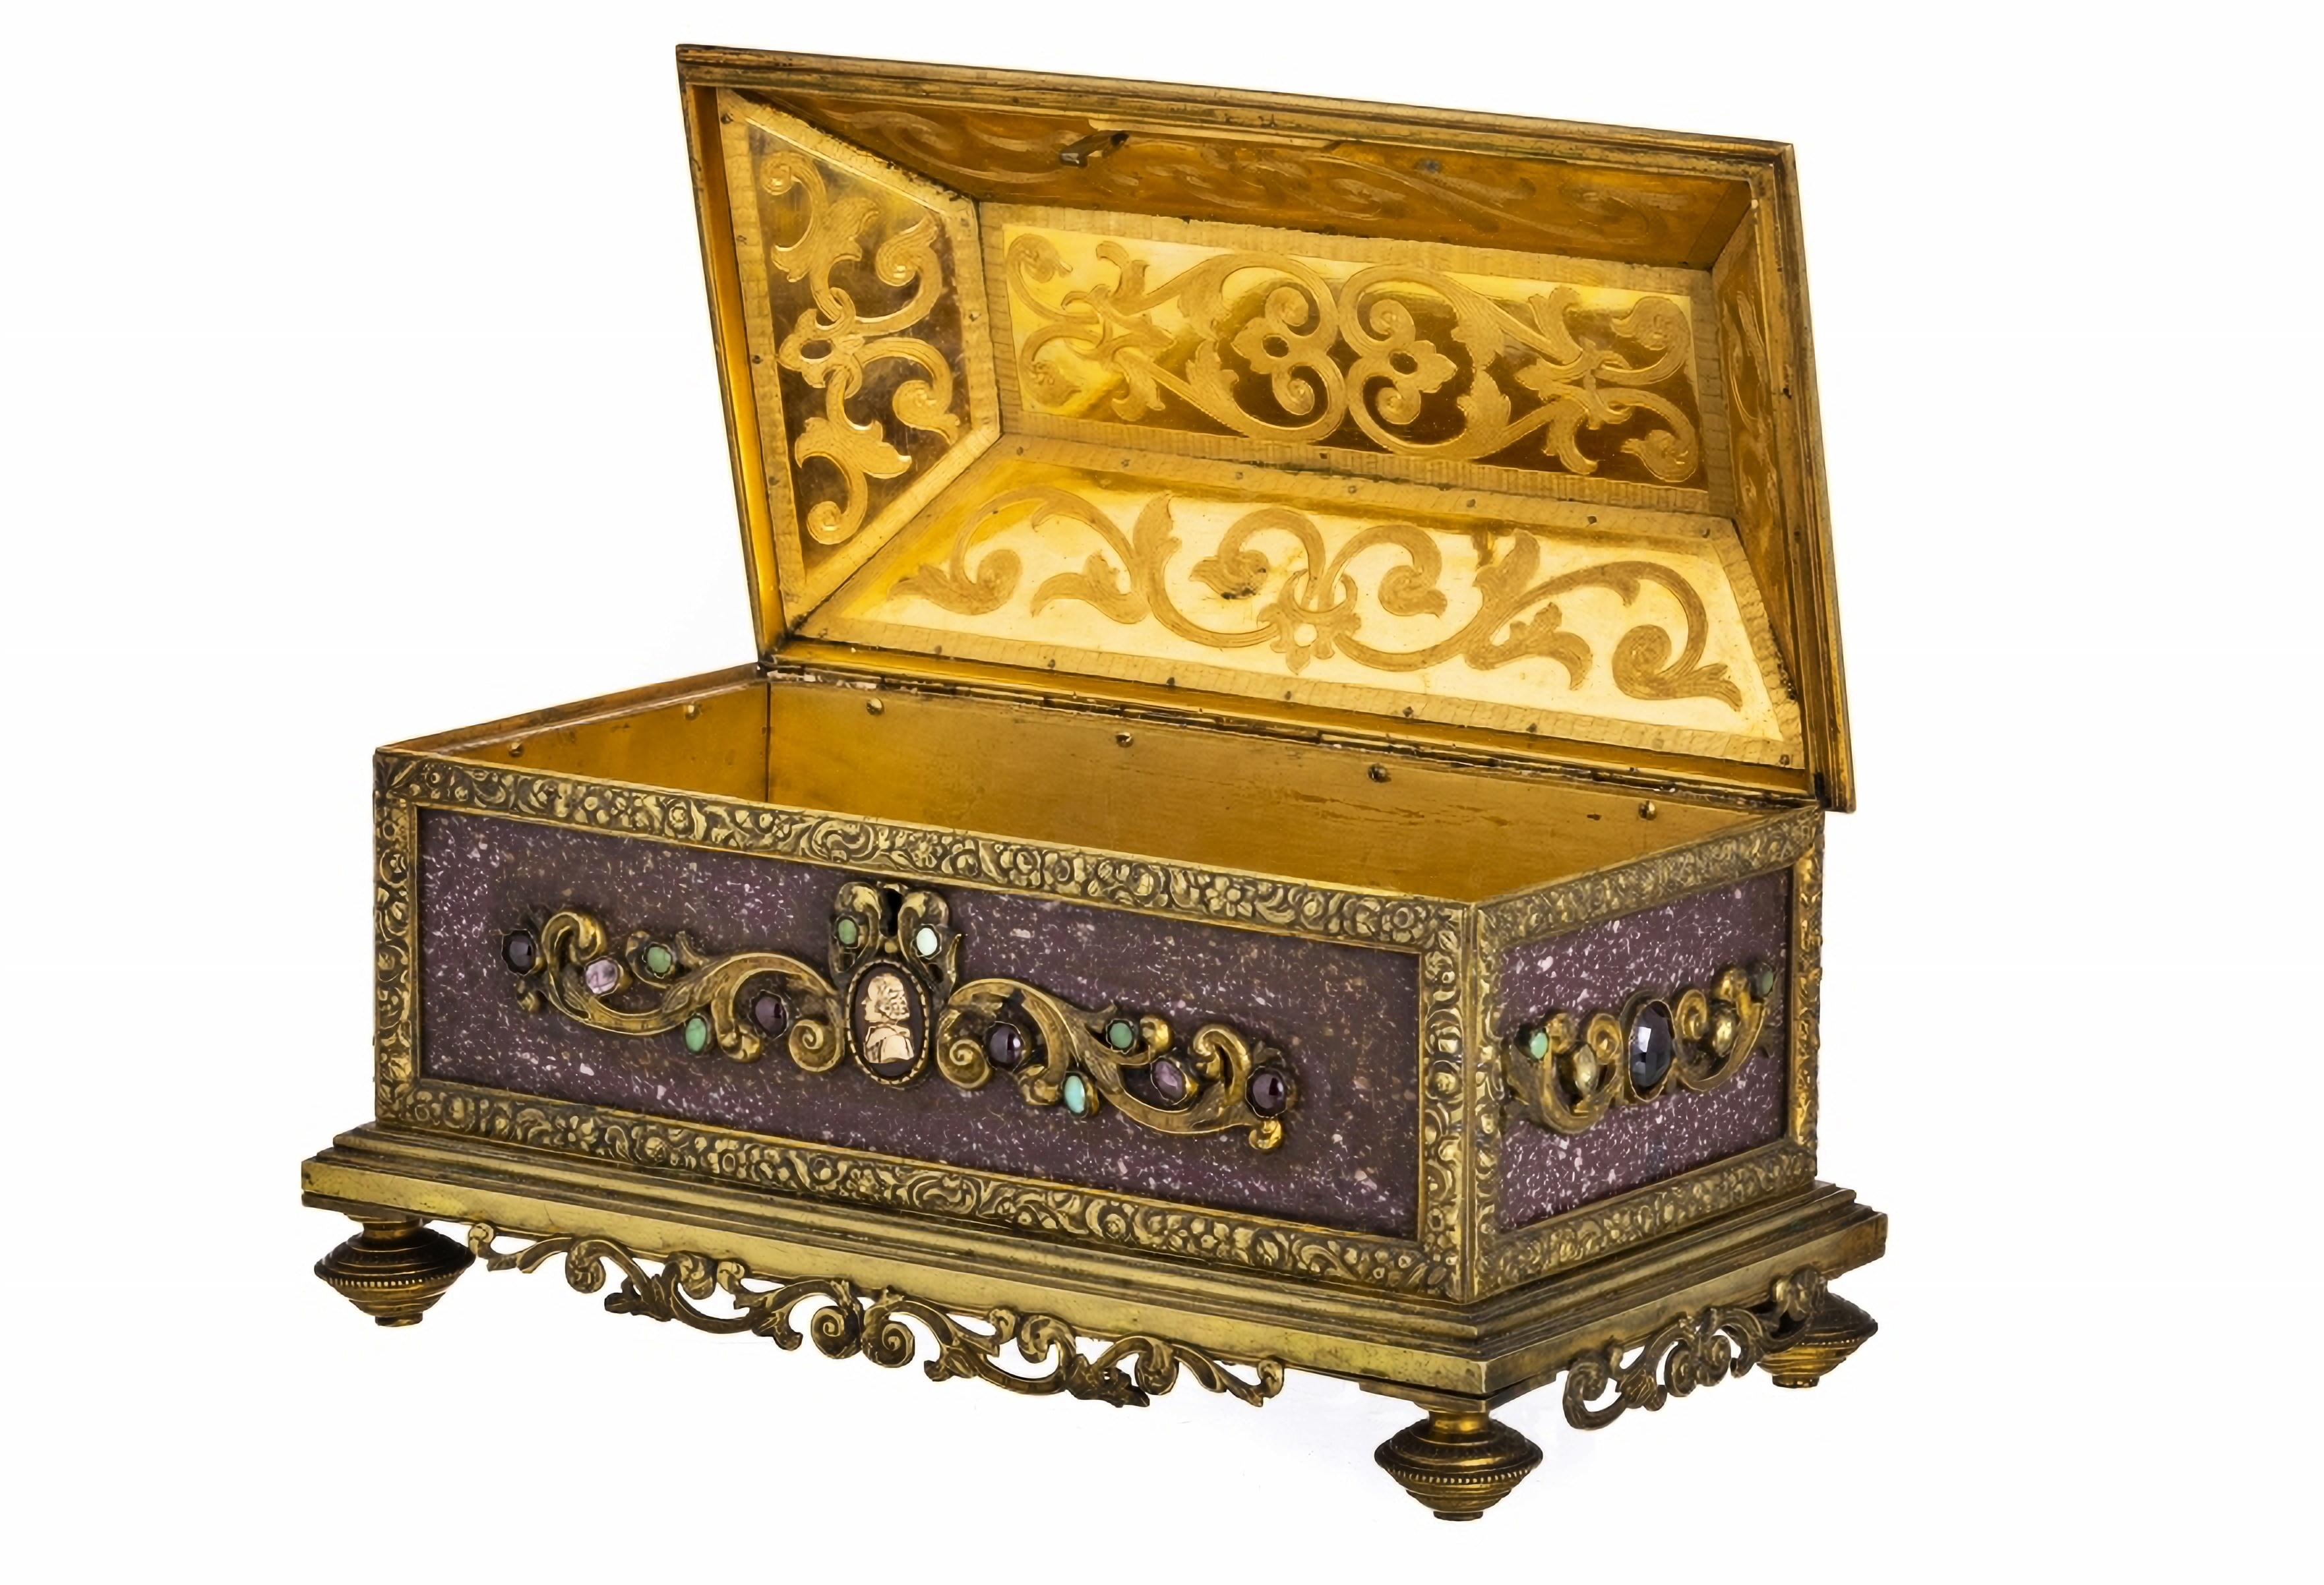 Important and Rare Italian box safe from the 17th century
In chiseled bronze, decorated with jasper plates and hard stones, with a cameo with a male figure at the centre. 
Inscription on the base.